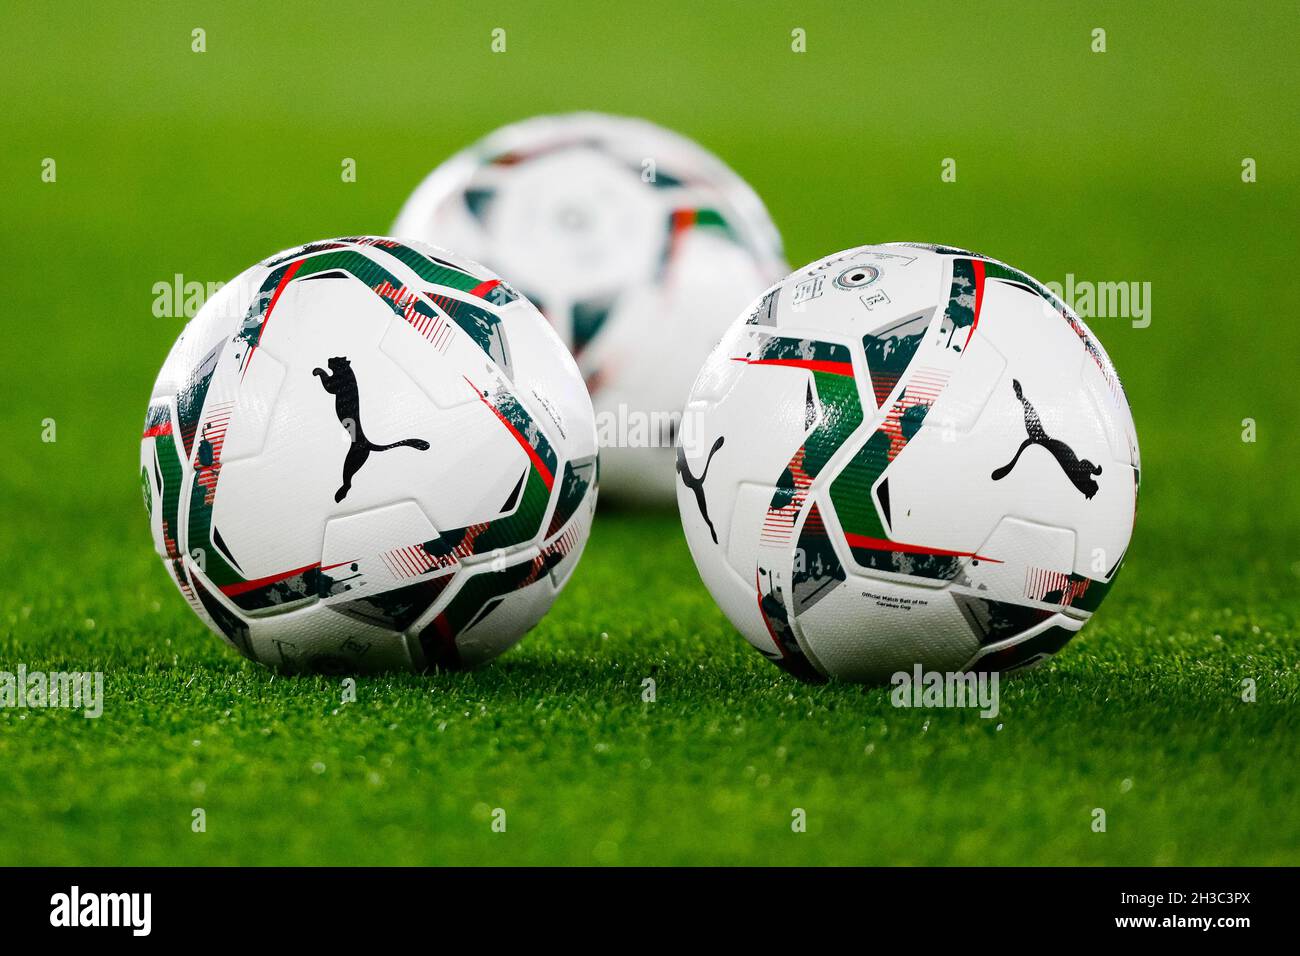 Puma Cup High Resolution Stock Photography and Images - Alamy